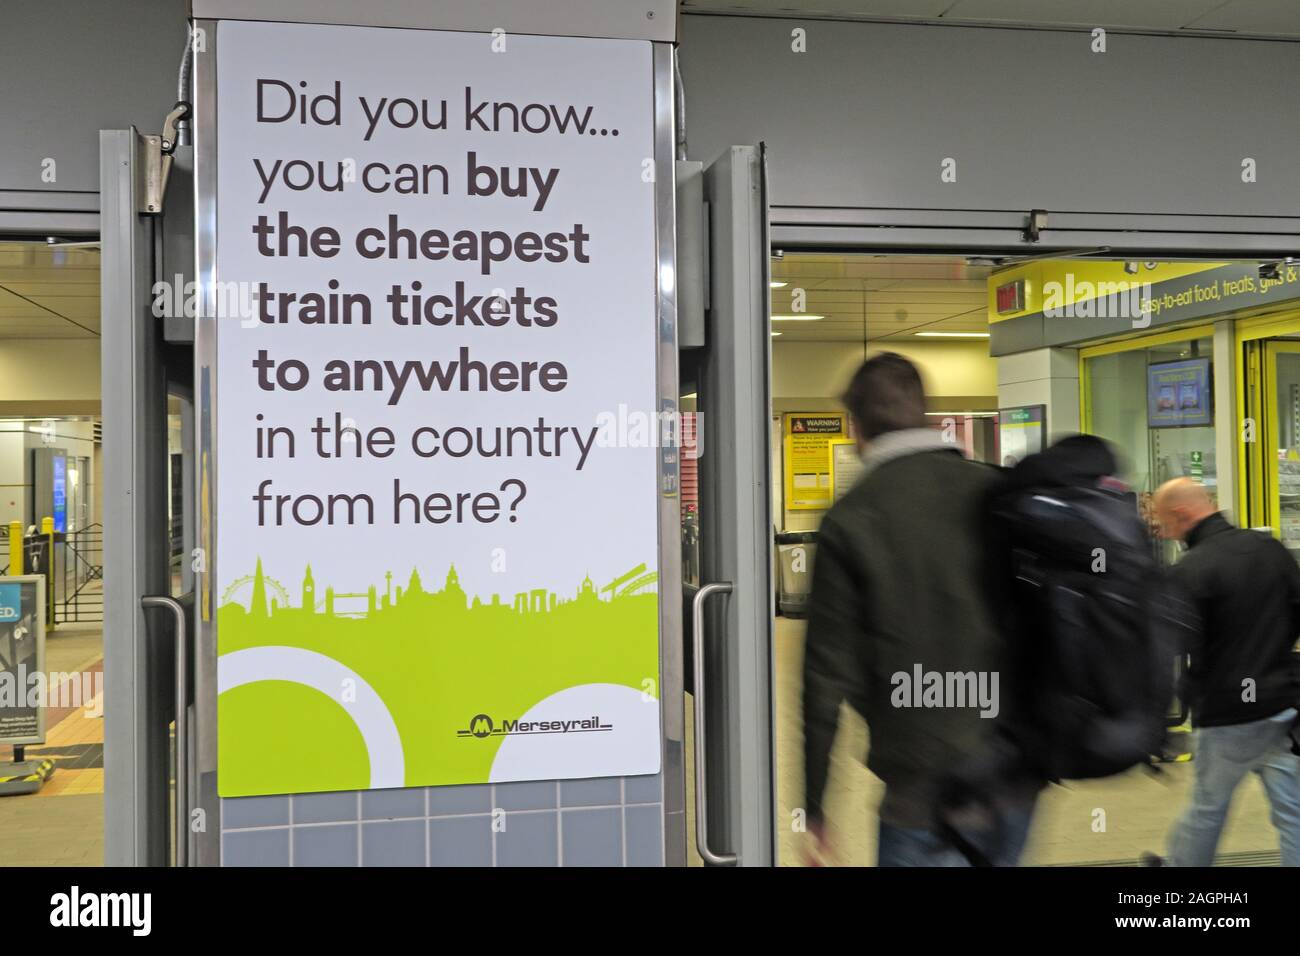 Merseyrail - Buy the cheapest train tickets to anywhere, poster in Lime st station, Liverpool , Merseyside, North West England, UK Stock Photo